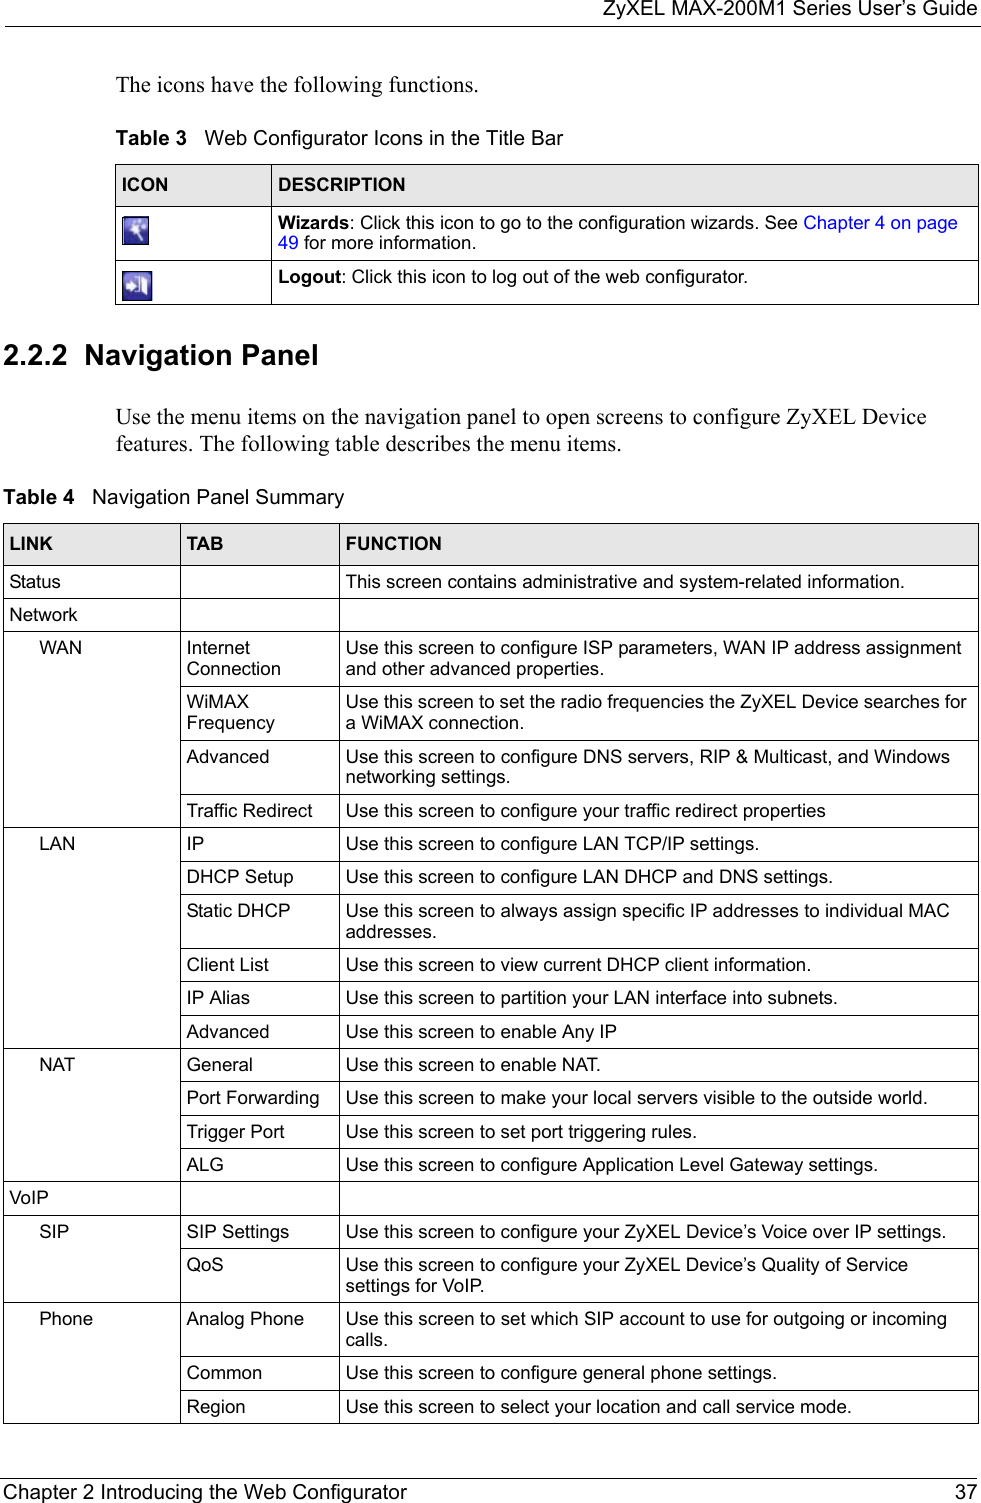 ZyXEL MAX-200M1 Series User’s GuideChapter 2 Introducing the Web Configurator 37The icons have the following functions.2.2.2  Navigation PanelUse the menu items on the navigation panel to open screens to configure ZyXEL Device features. The following table describes the menu items.Table 3   Web Configurator Icons in the Title BarICON  DESCRIPTIONWizards: Click this icon to go to the configuration wizards. See Chapter 4 on page 49 for more information.Logout: Click this icon to log out of the web configurator.Table 4   Navigation Panel SummaryLINK TAB FUNCTIONStatus This screen contains administrative and system-related information.NetworkWAN Internet ConnectionUse this screen to configure ISP parameters, WAN IP address assignment and other advanced properties.WiMAX FrequencyUse this screen to set the radio frequencies the ZyXEL Device searches for a WiMAX connection.Advanced Use this screen to configure DNS servers, RIP &amp; Multicast, and Windows networking settings.Traffic Redirect Use this screen to configure your traffic redirect propertiesLAN IP Use this screen to configure LAN TCP/IP settings.DHCP Setup Use this screen to configure LAN DHCP and DNS settings.Static DHCP Use this screen to always assign specific IP addresses to individual MAC addresses.Client List Use this screen to view current DHCP client information.IP Alias Use this screen to partition your LAN interface into subnets.Advanced Use this screen to enable Any IPNAT General Use this screen to enable NAT.Port Forwarding Use this screen to make your local servers visible to the outside world.Trigger Port Use this screen to set port triggering rules.ALG Use this screen to configure Application Level Gateway settings.VoIPSIP SIP Settings Use this screen to configure your ZyXEL Device’s Voice over IP settings.QoS Use this screen to configure your ZyXEL Device’s Quality of Service settings for VoIP.Phone Analog Phone Use this screen to set which SIP account to use for outgoing or incoming calls.Common Use this screen to configure general phone settings.Region Use this screen to select your location and call service mode.